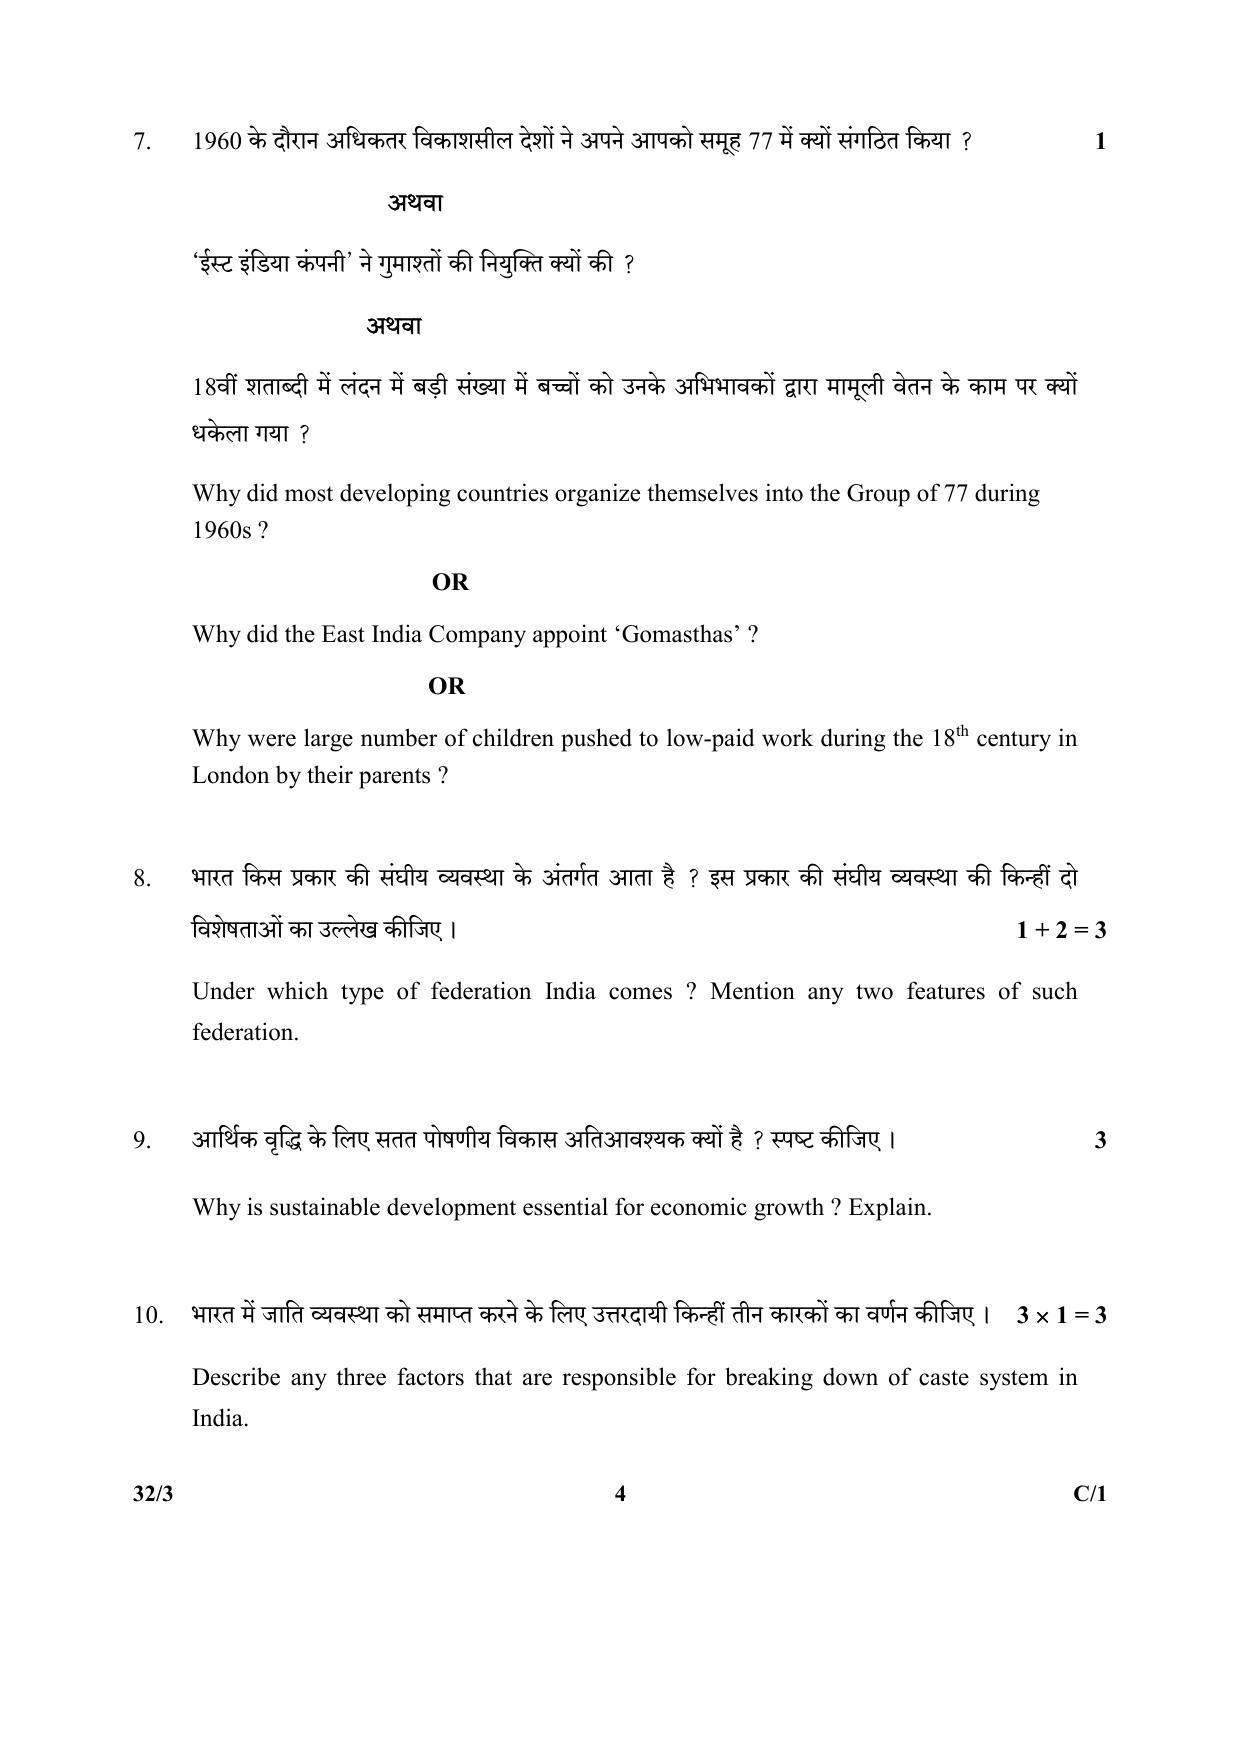 CBSE Class 10 32-3_Social Science 2018 Compartment Question Paper - Page 4